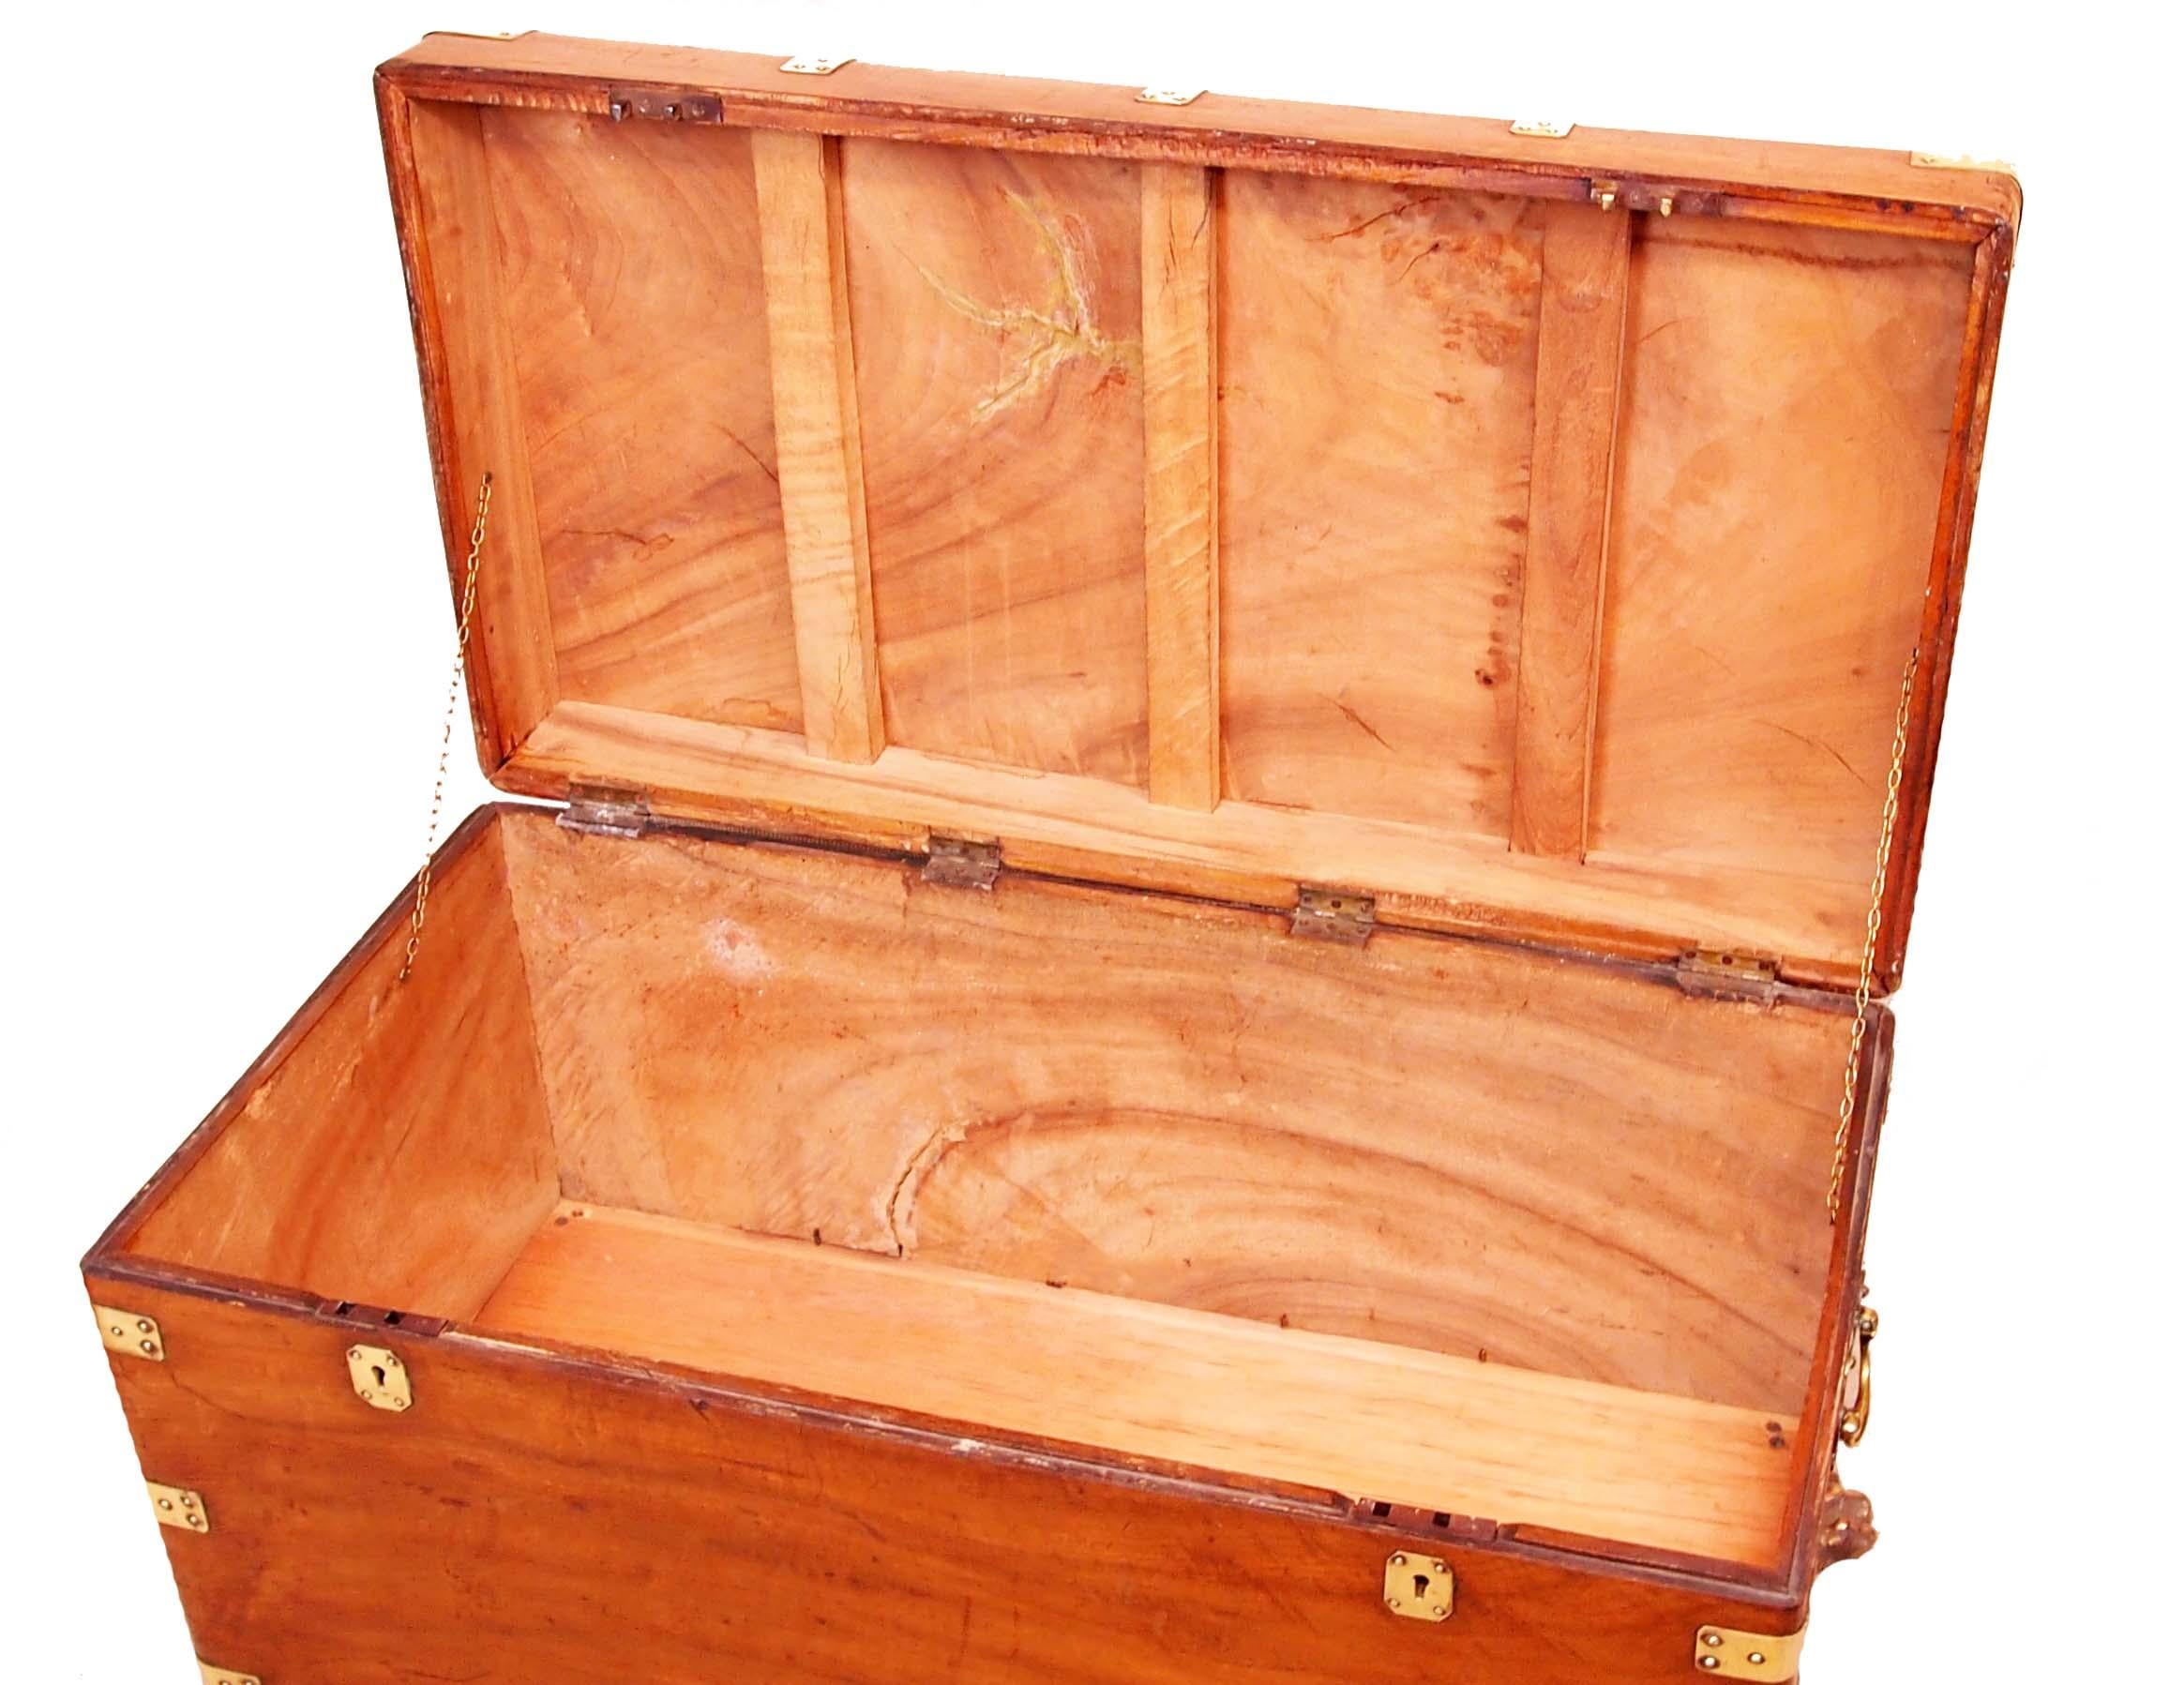 A delightful mid-19th century camphor wood military
Campaign trunk of good proportions having original
Brass bound decoration and carrying handles raised
On later brass paw feet

(This trunk would originally have been made for a sergeant
to